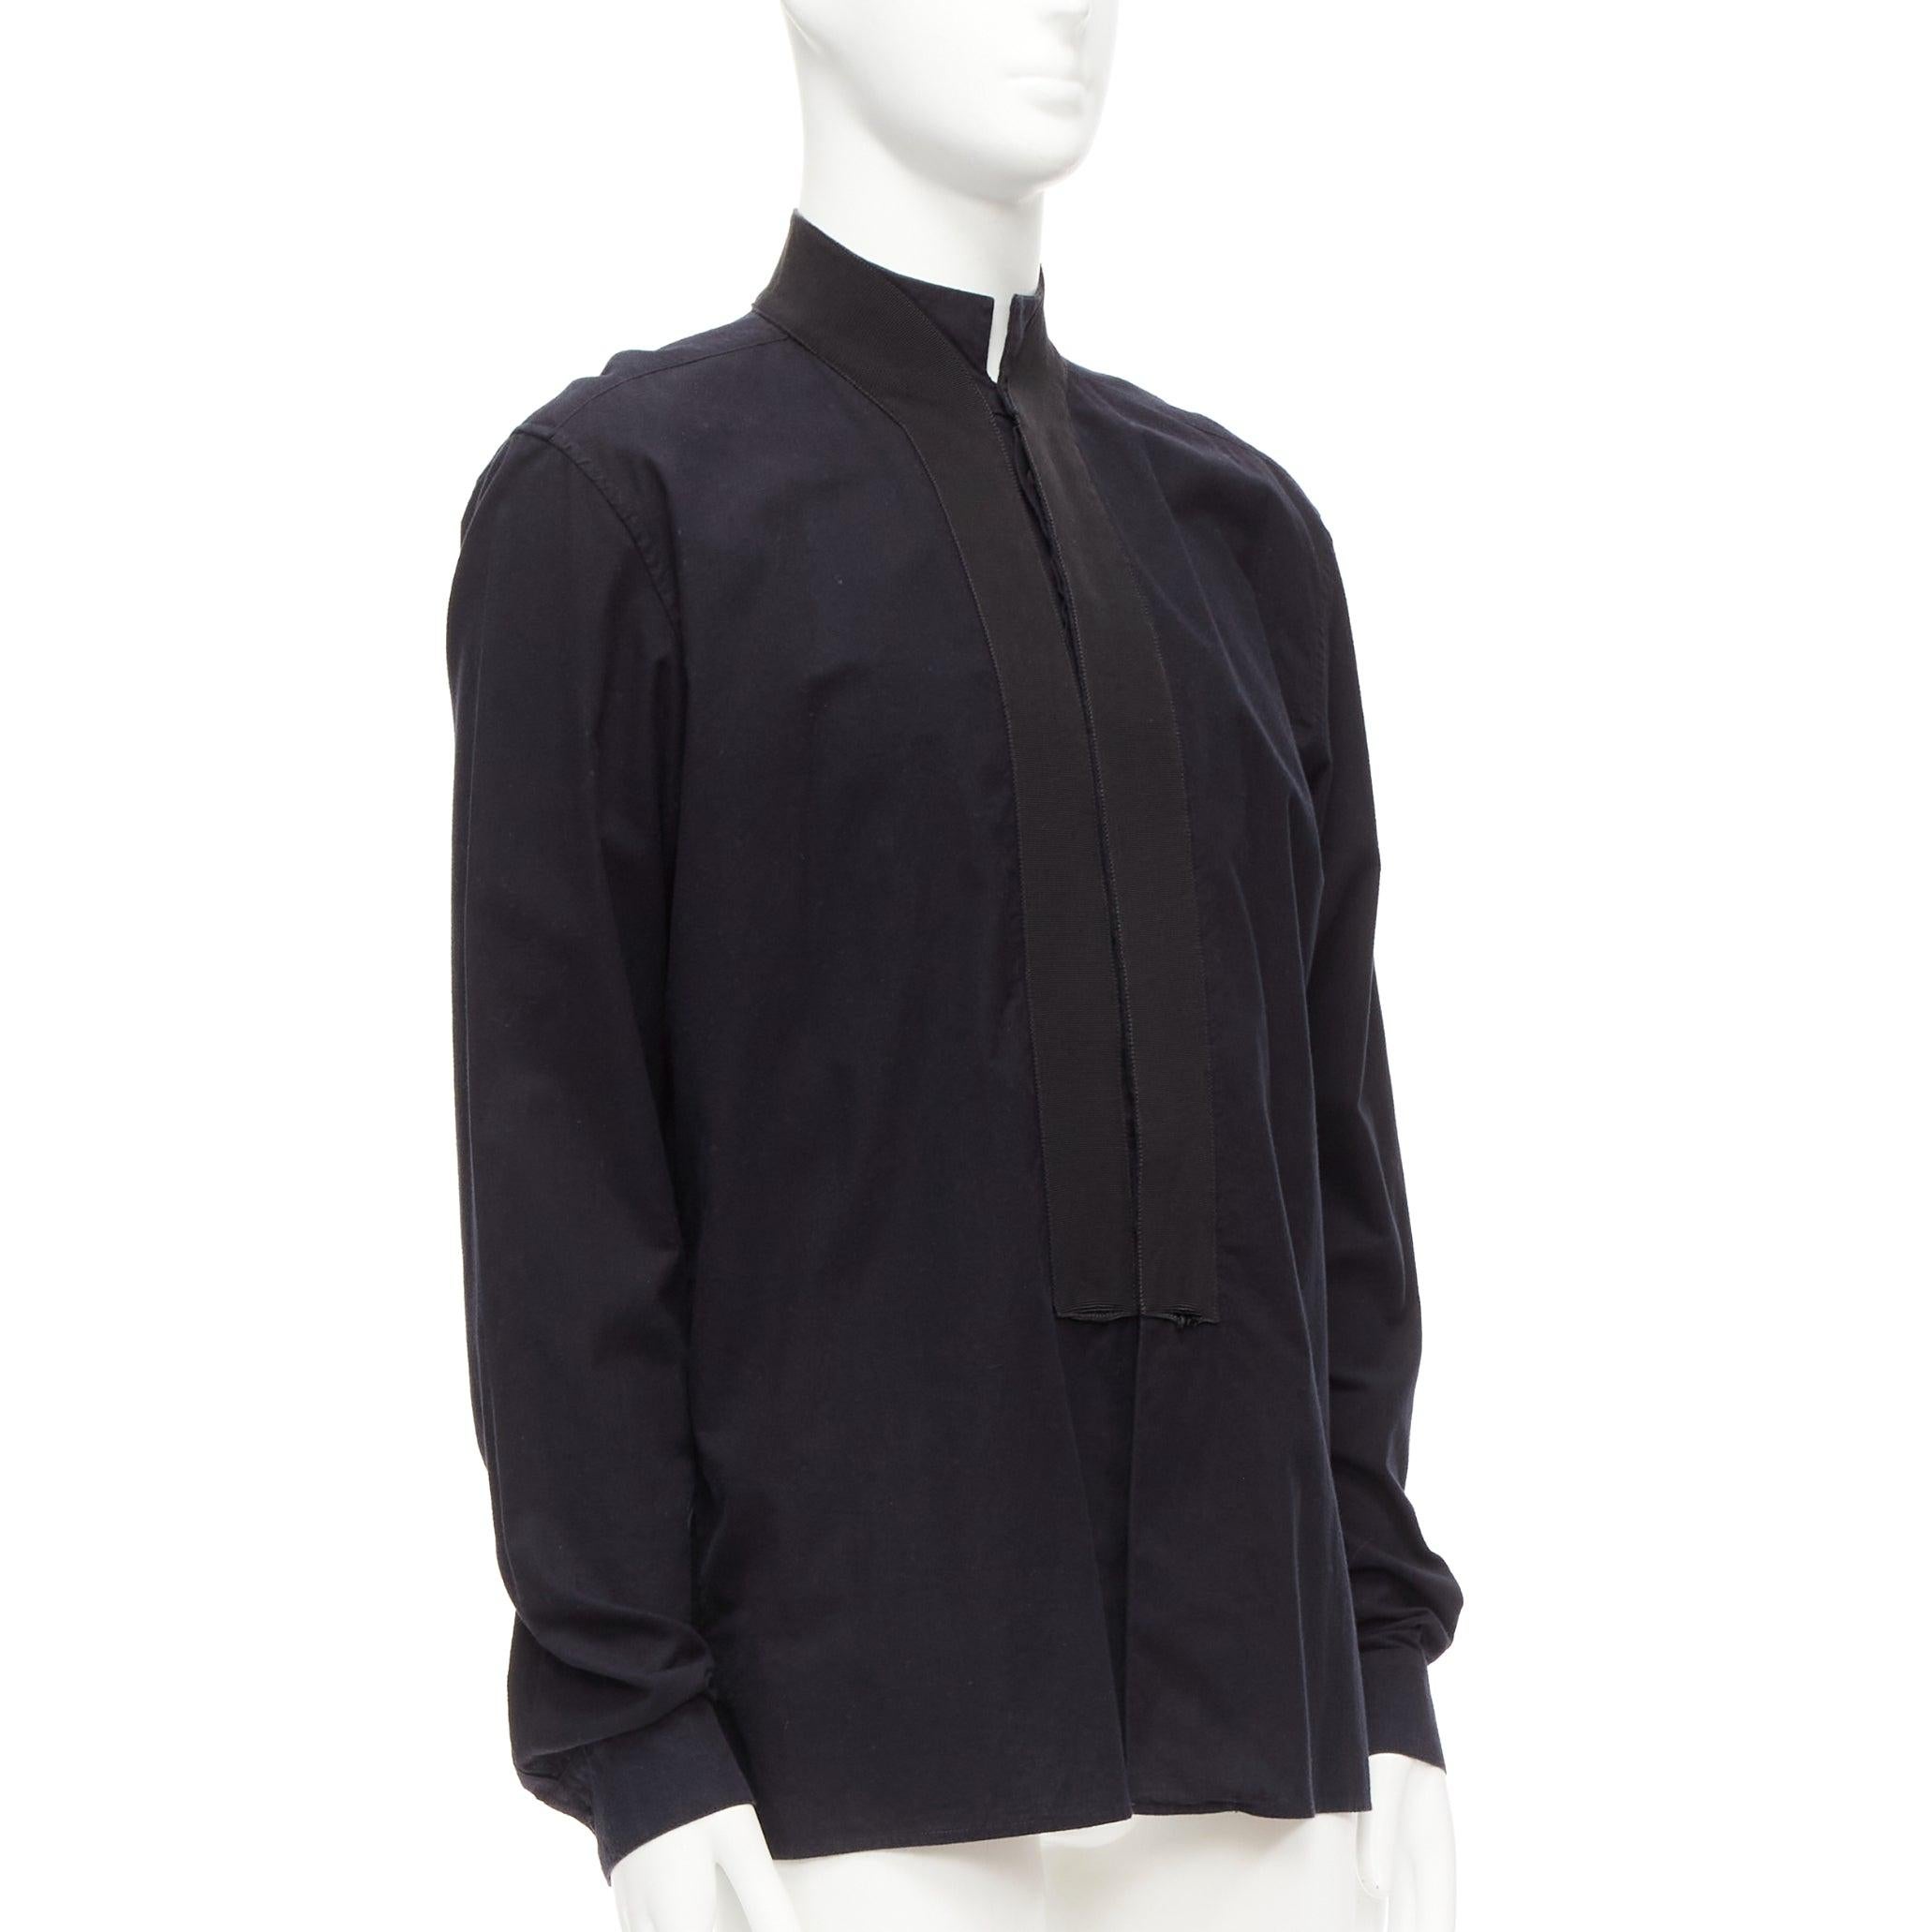 HAIDER ACKERMANN black cotton ribbon trim front bishop dress shirt S
Reference: CNLE/A00294
Brand: Haider Ackermann
Material: Cotton
Color: Black
Pattern: Solid
Closure: Button
Extra Details: Back yoke.
Made in: Romania

CONDITION:
Condition: Good,